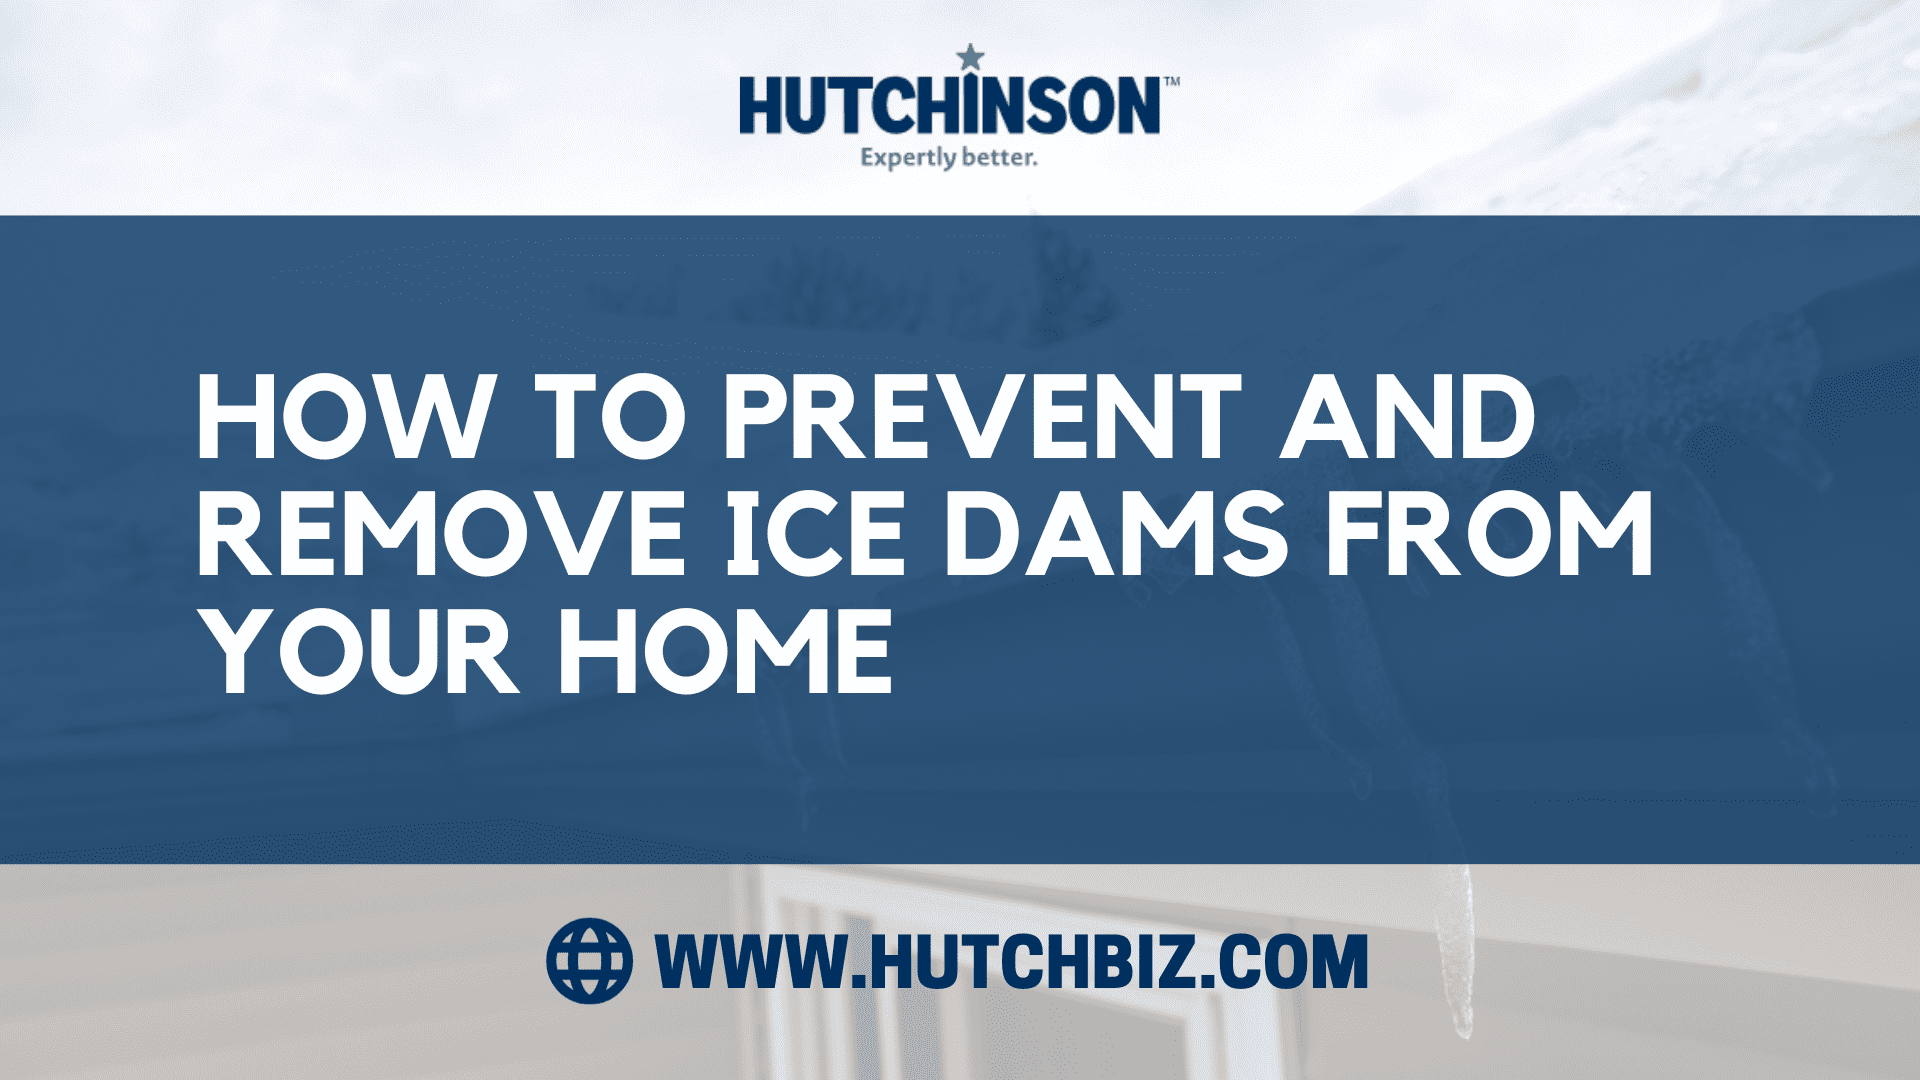 How to Prevent and Remove Ice Dams from Your Home